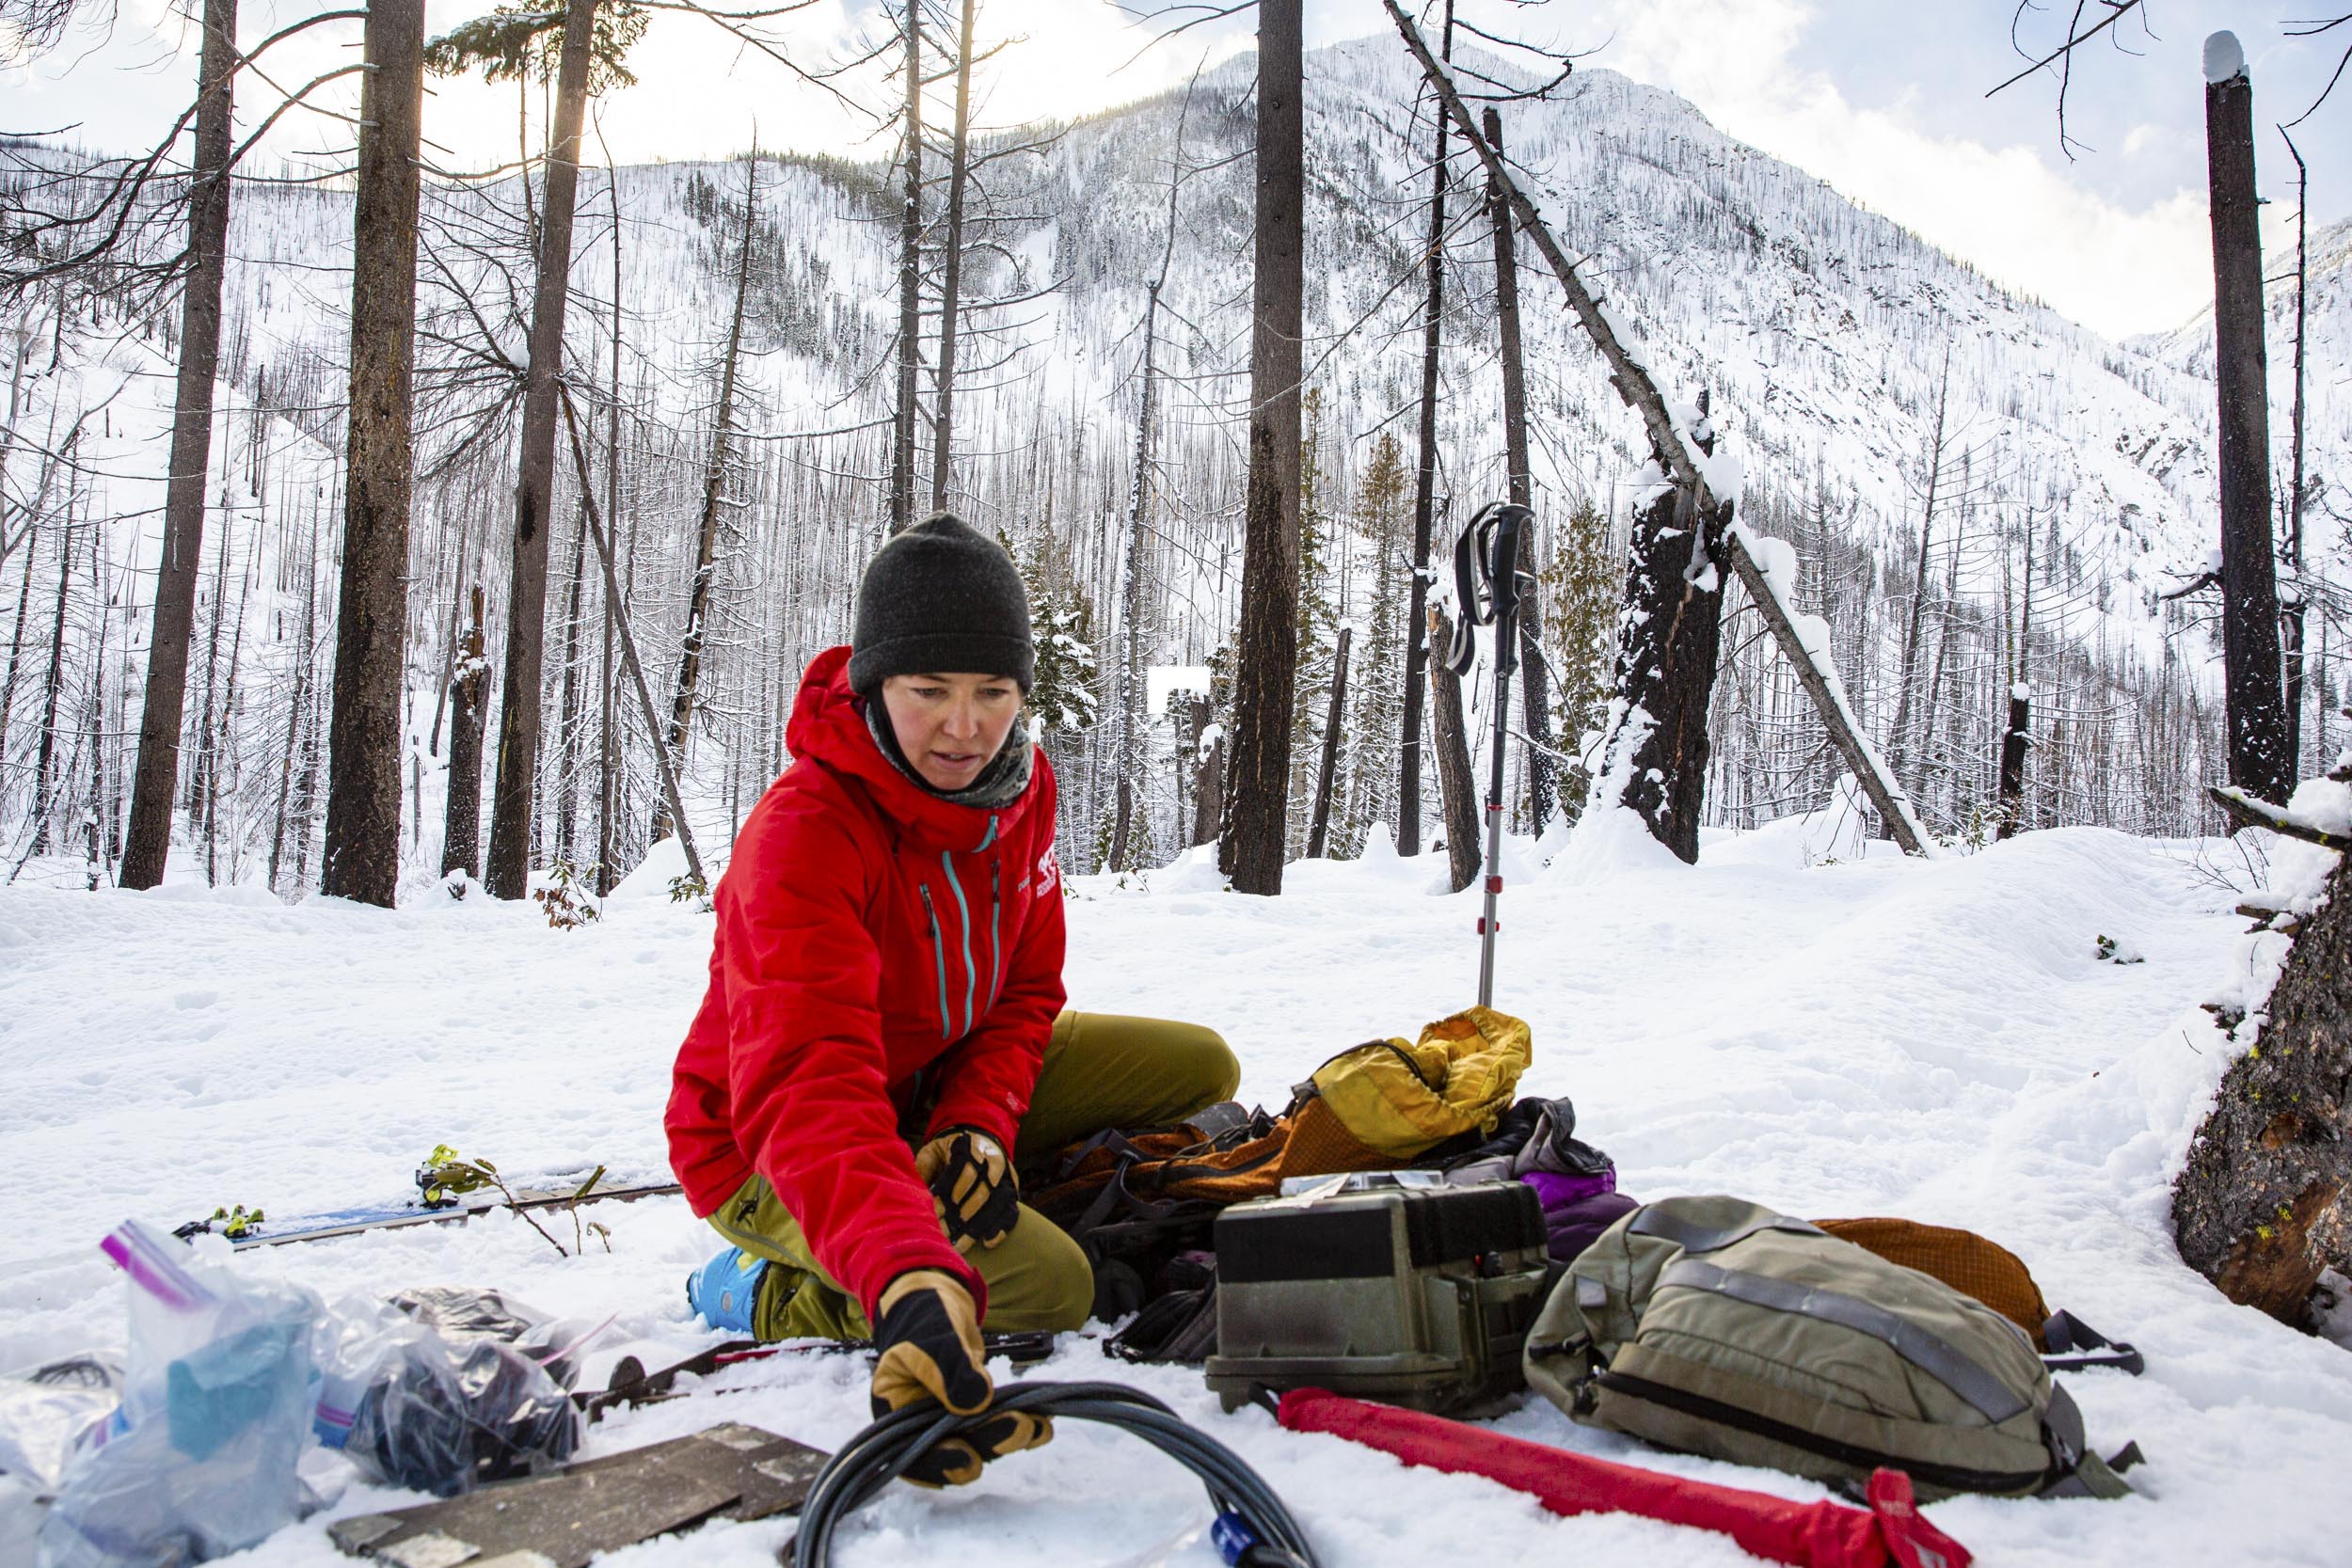 A field biologist organizes equipment in the snow